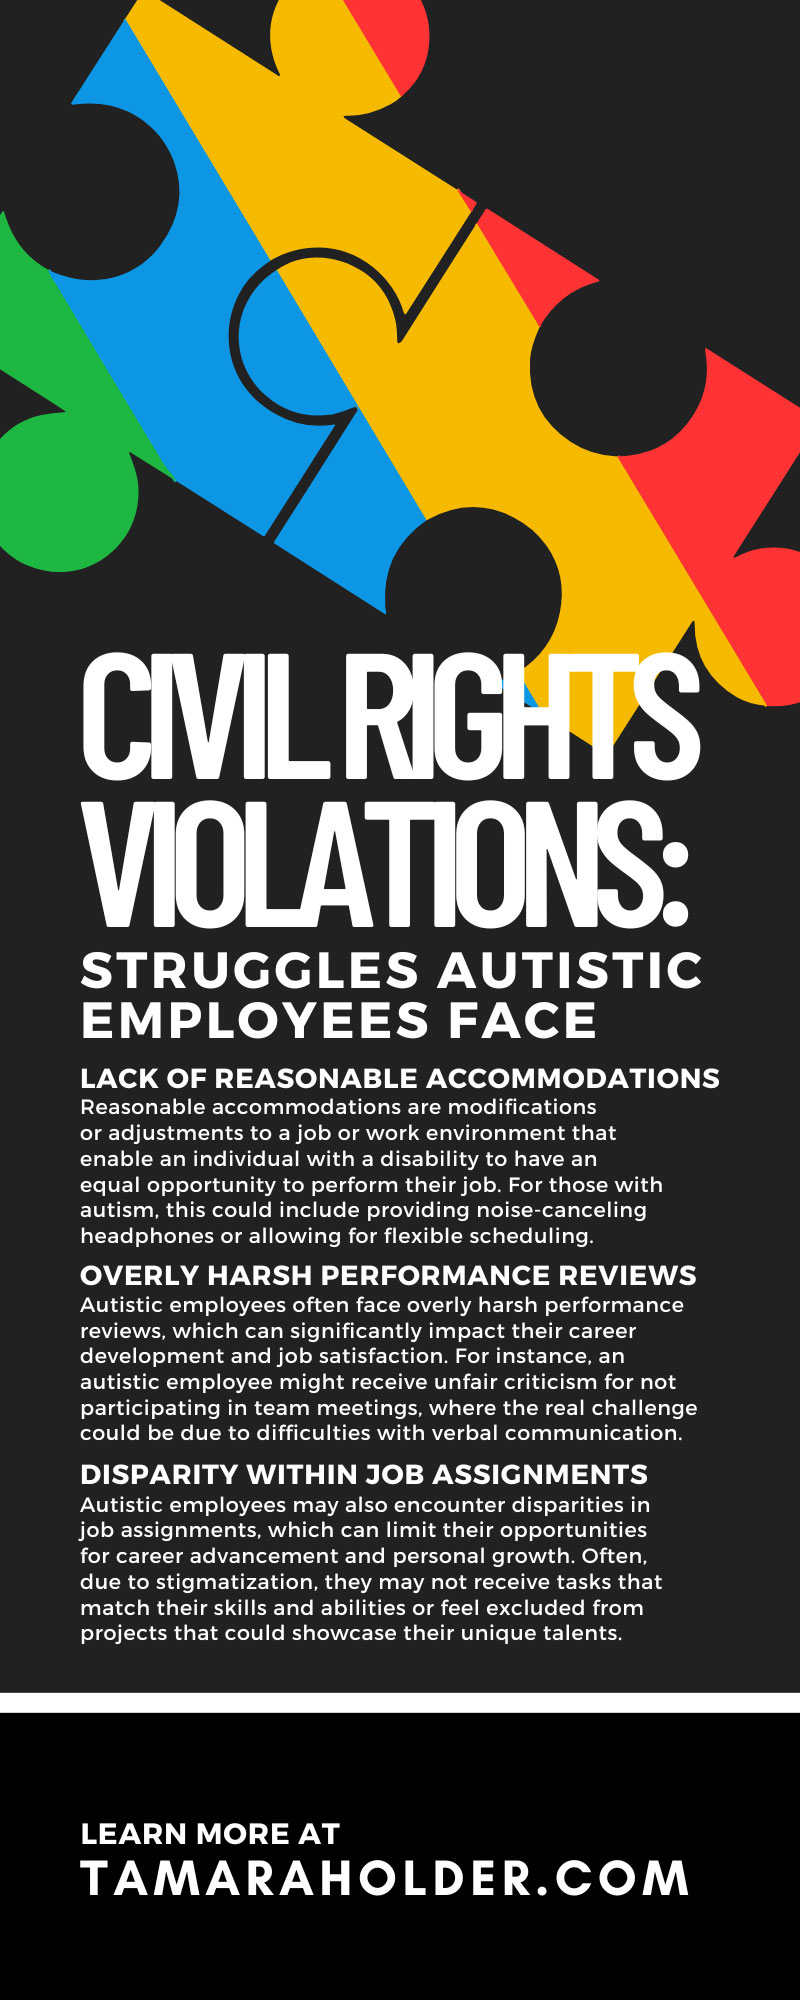 Civil Rights Violations: Struggles Autistic Employees Face